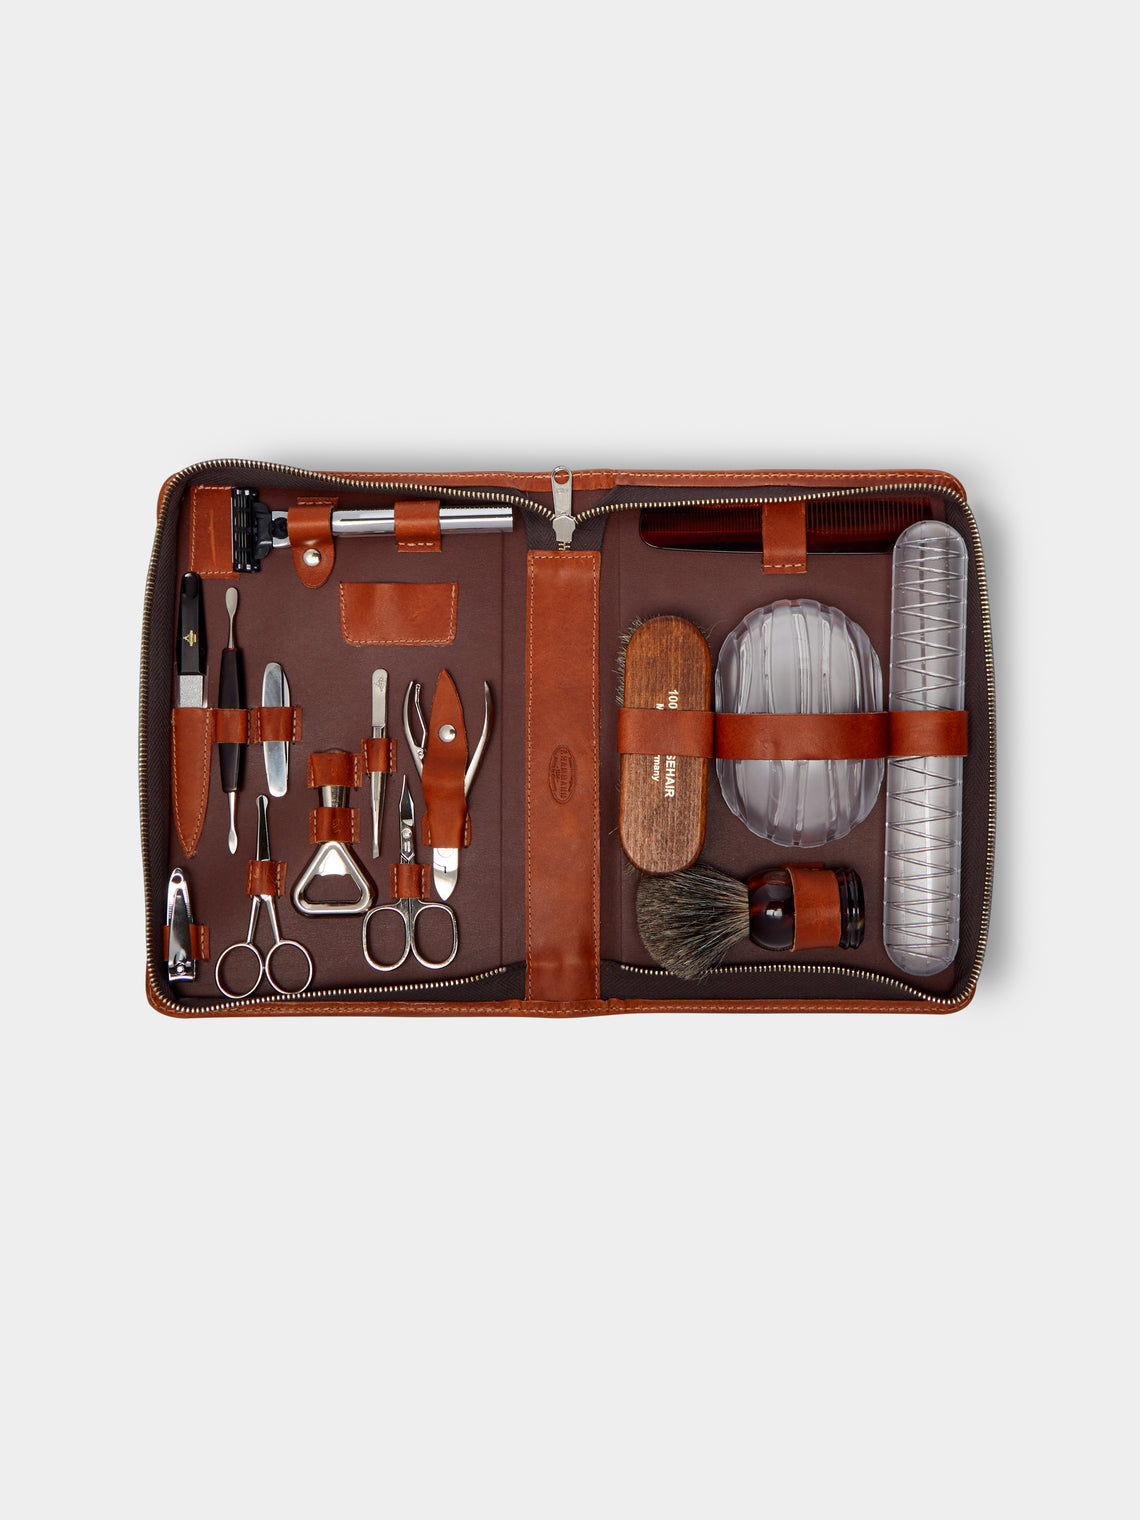 F. Hammann - Leather Large Grooming and Manicure Set -  - ABASK